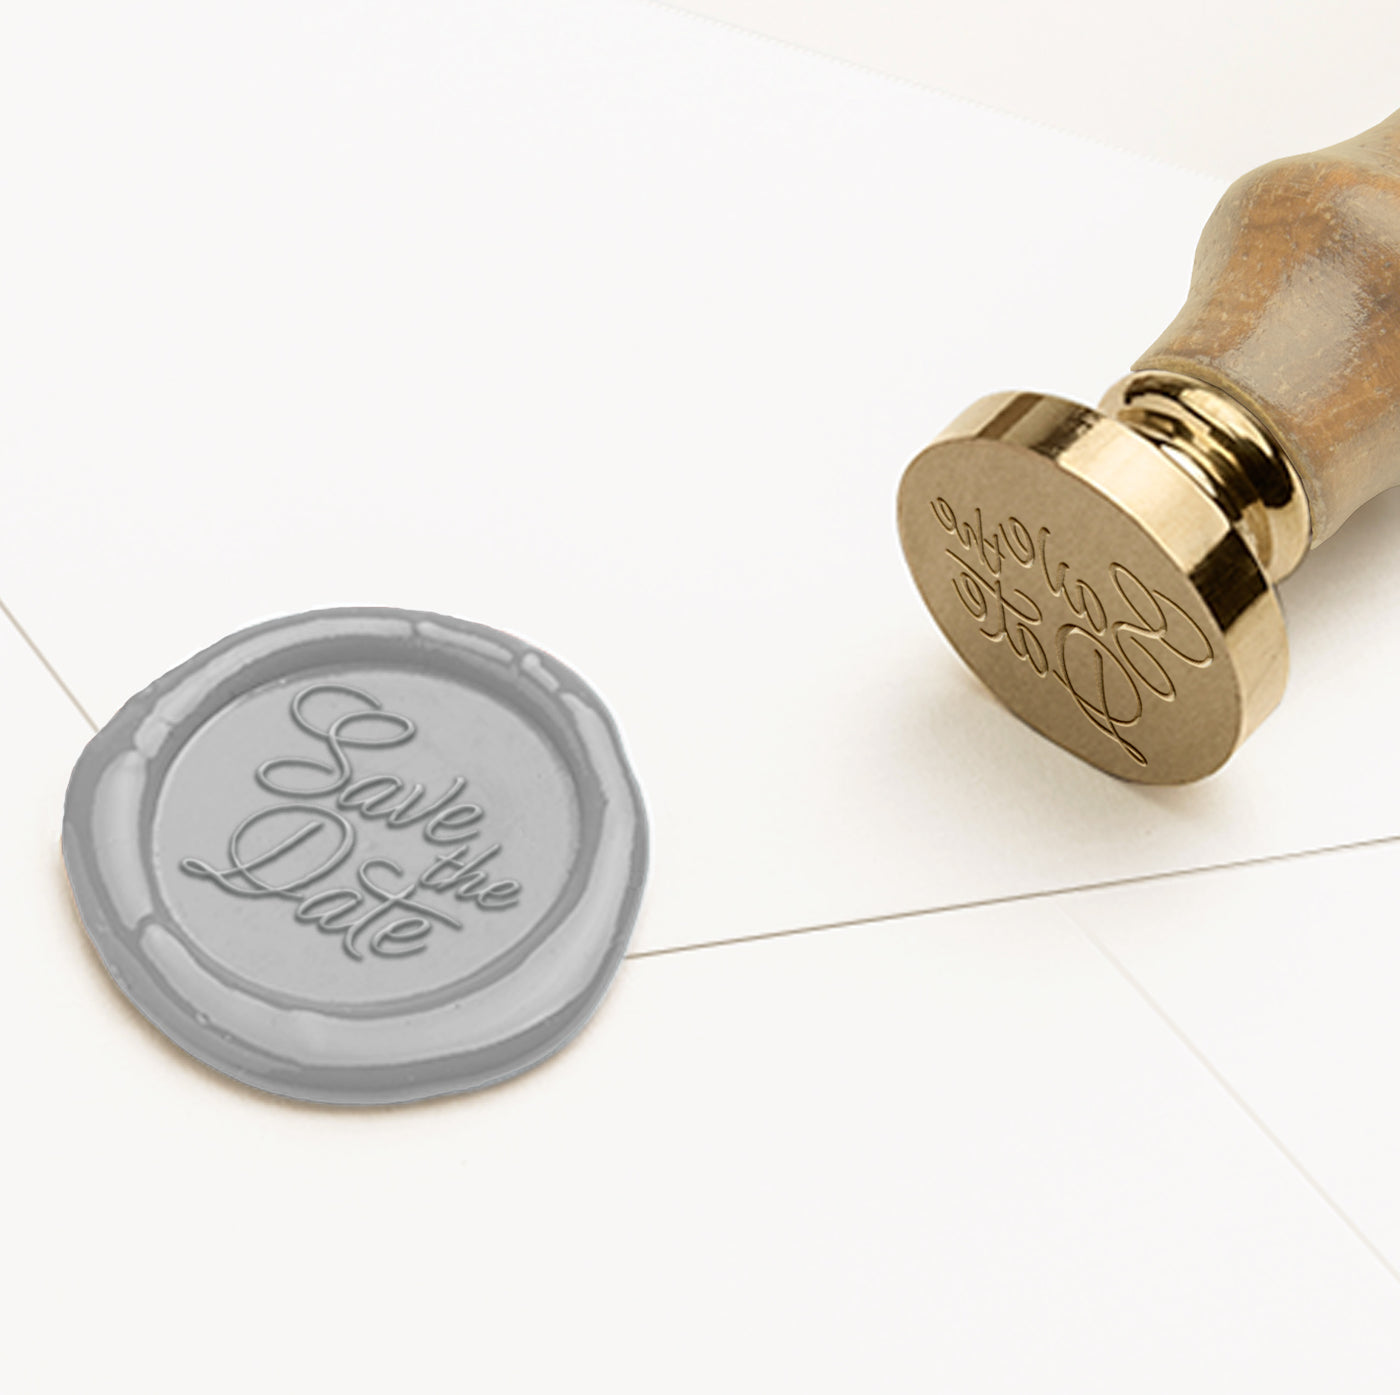 SAVE THE DATE - WAX SEAL STAMP